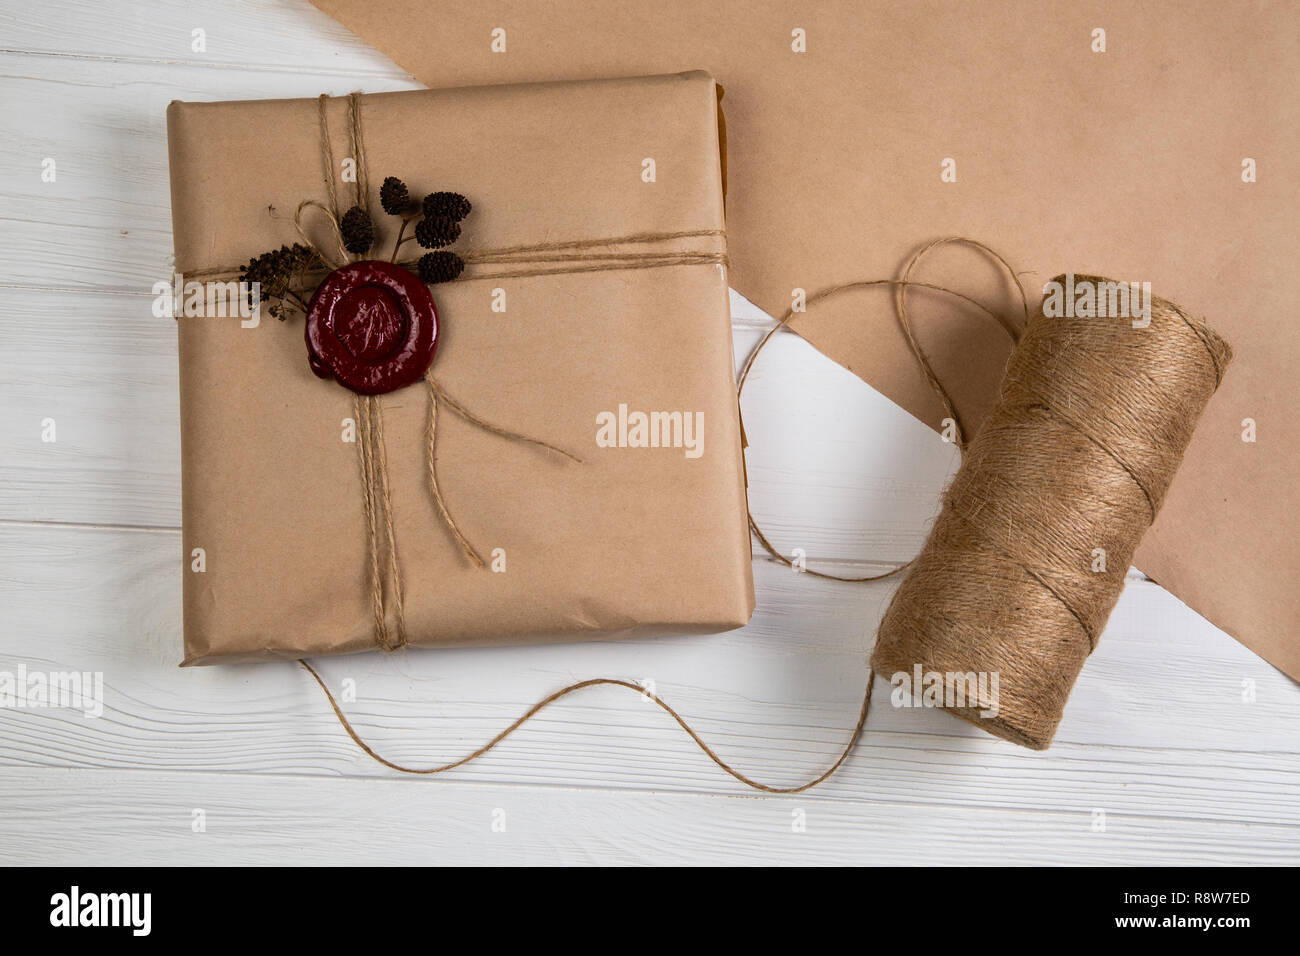 Pepin Press Wrapping Paper with a wax seal goes for all seasons : r/Wrapping